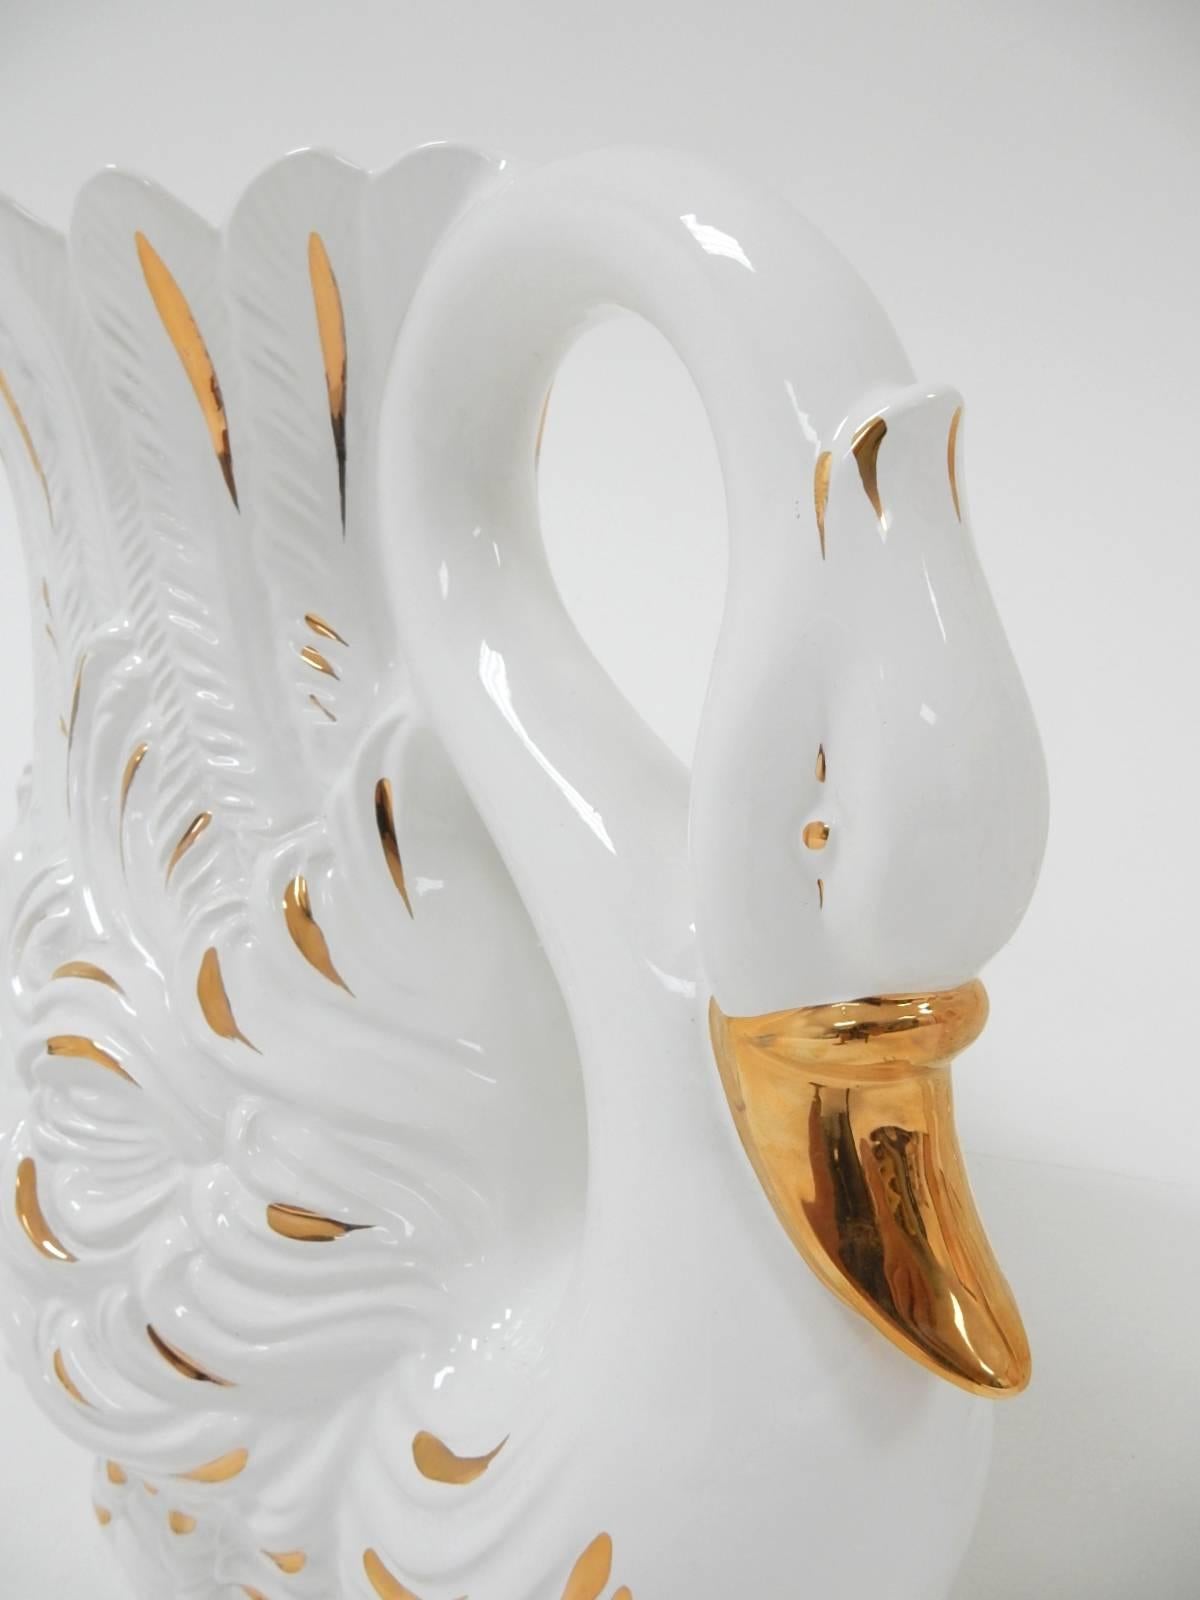 Venetian Life Size Swan Vessel Planters by Bassano, Italy In Good Condition For Sale In Las Vegas, NV